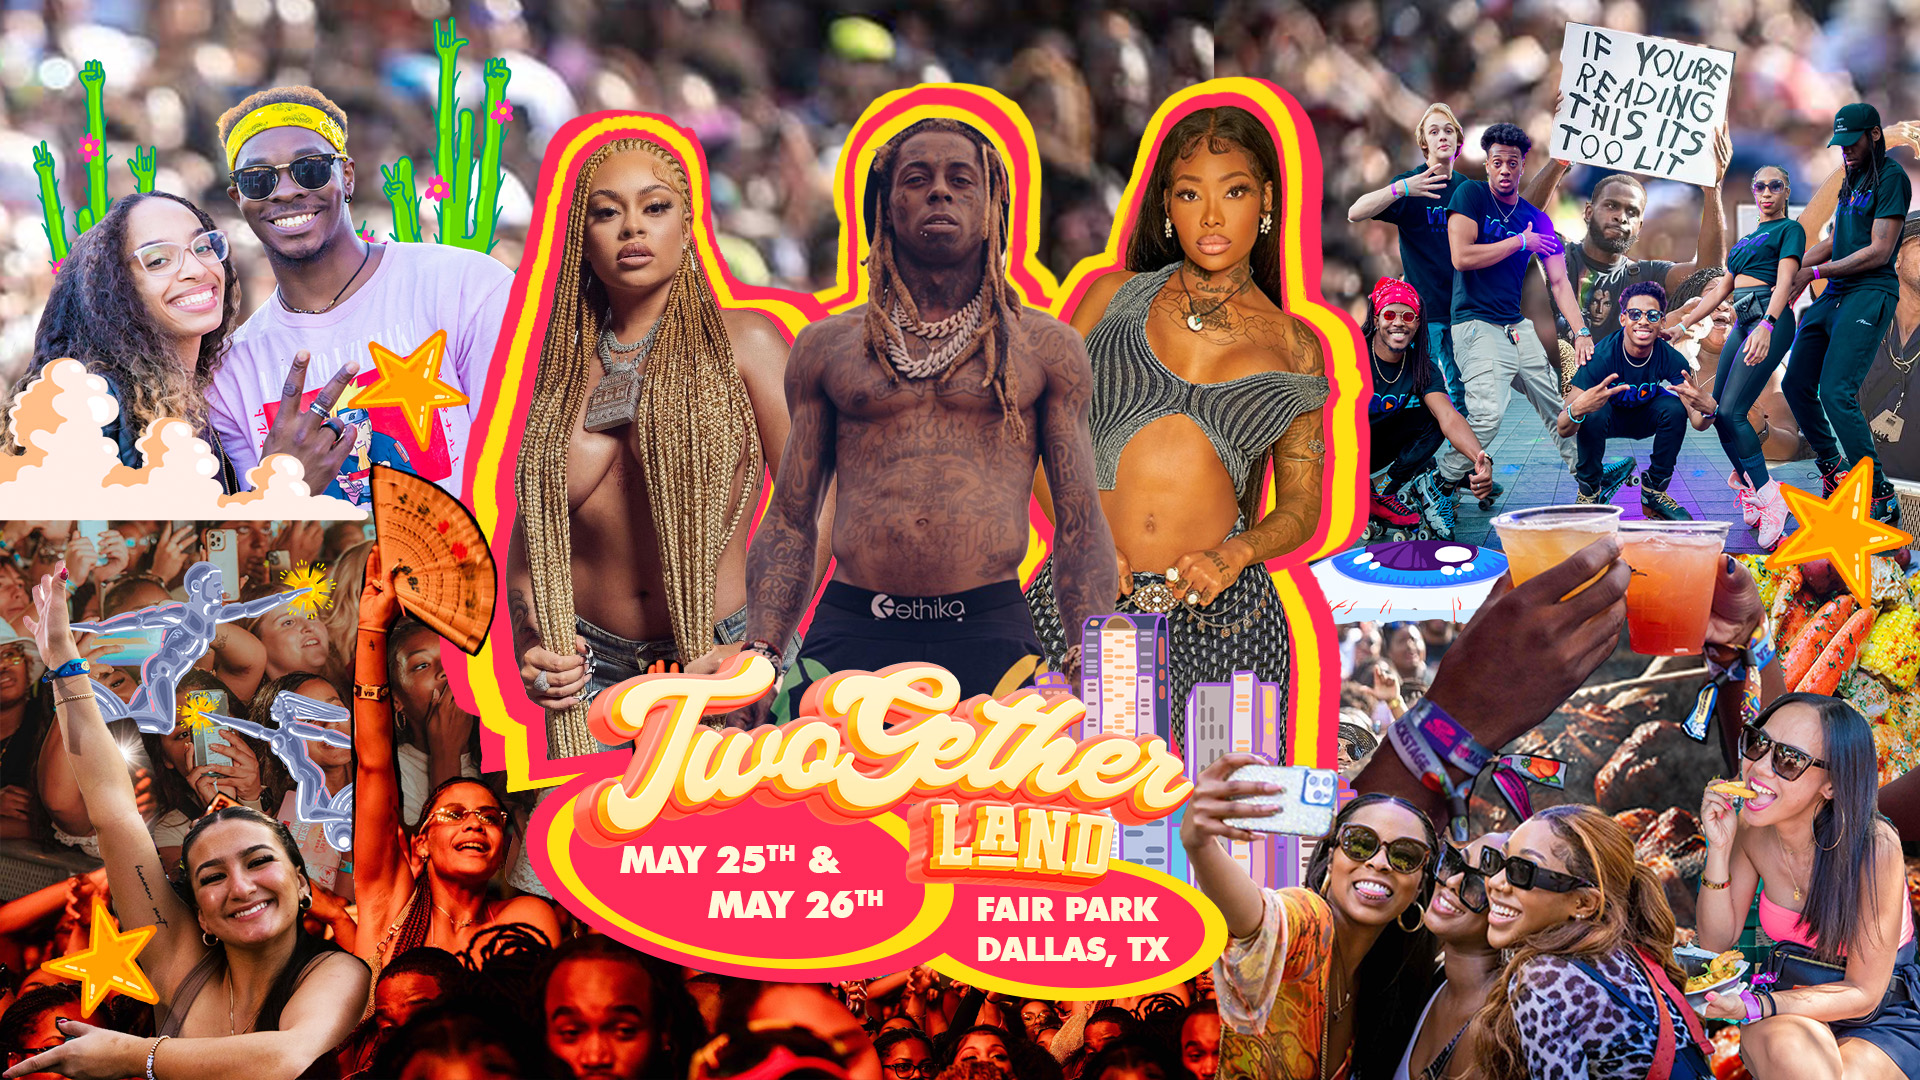 Roomies! Enter To Win Platinum Tickets To TwoGether Land Featuring Lil Wayne, Summer Walker, Latto, And More! thumbnail